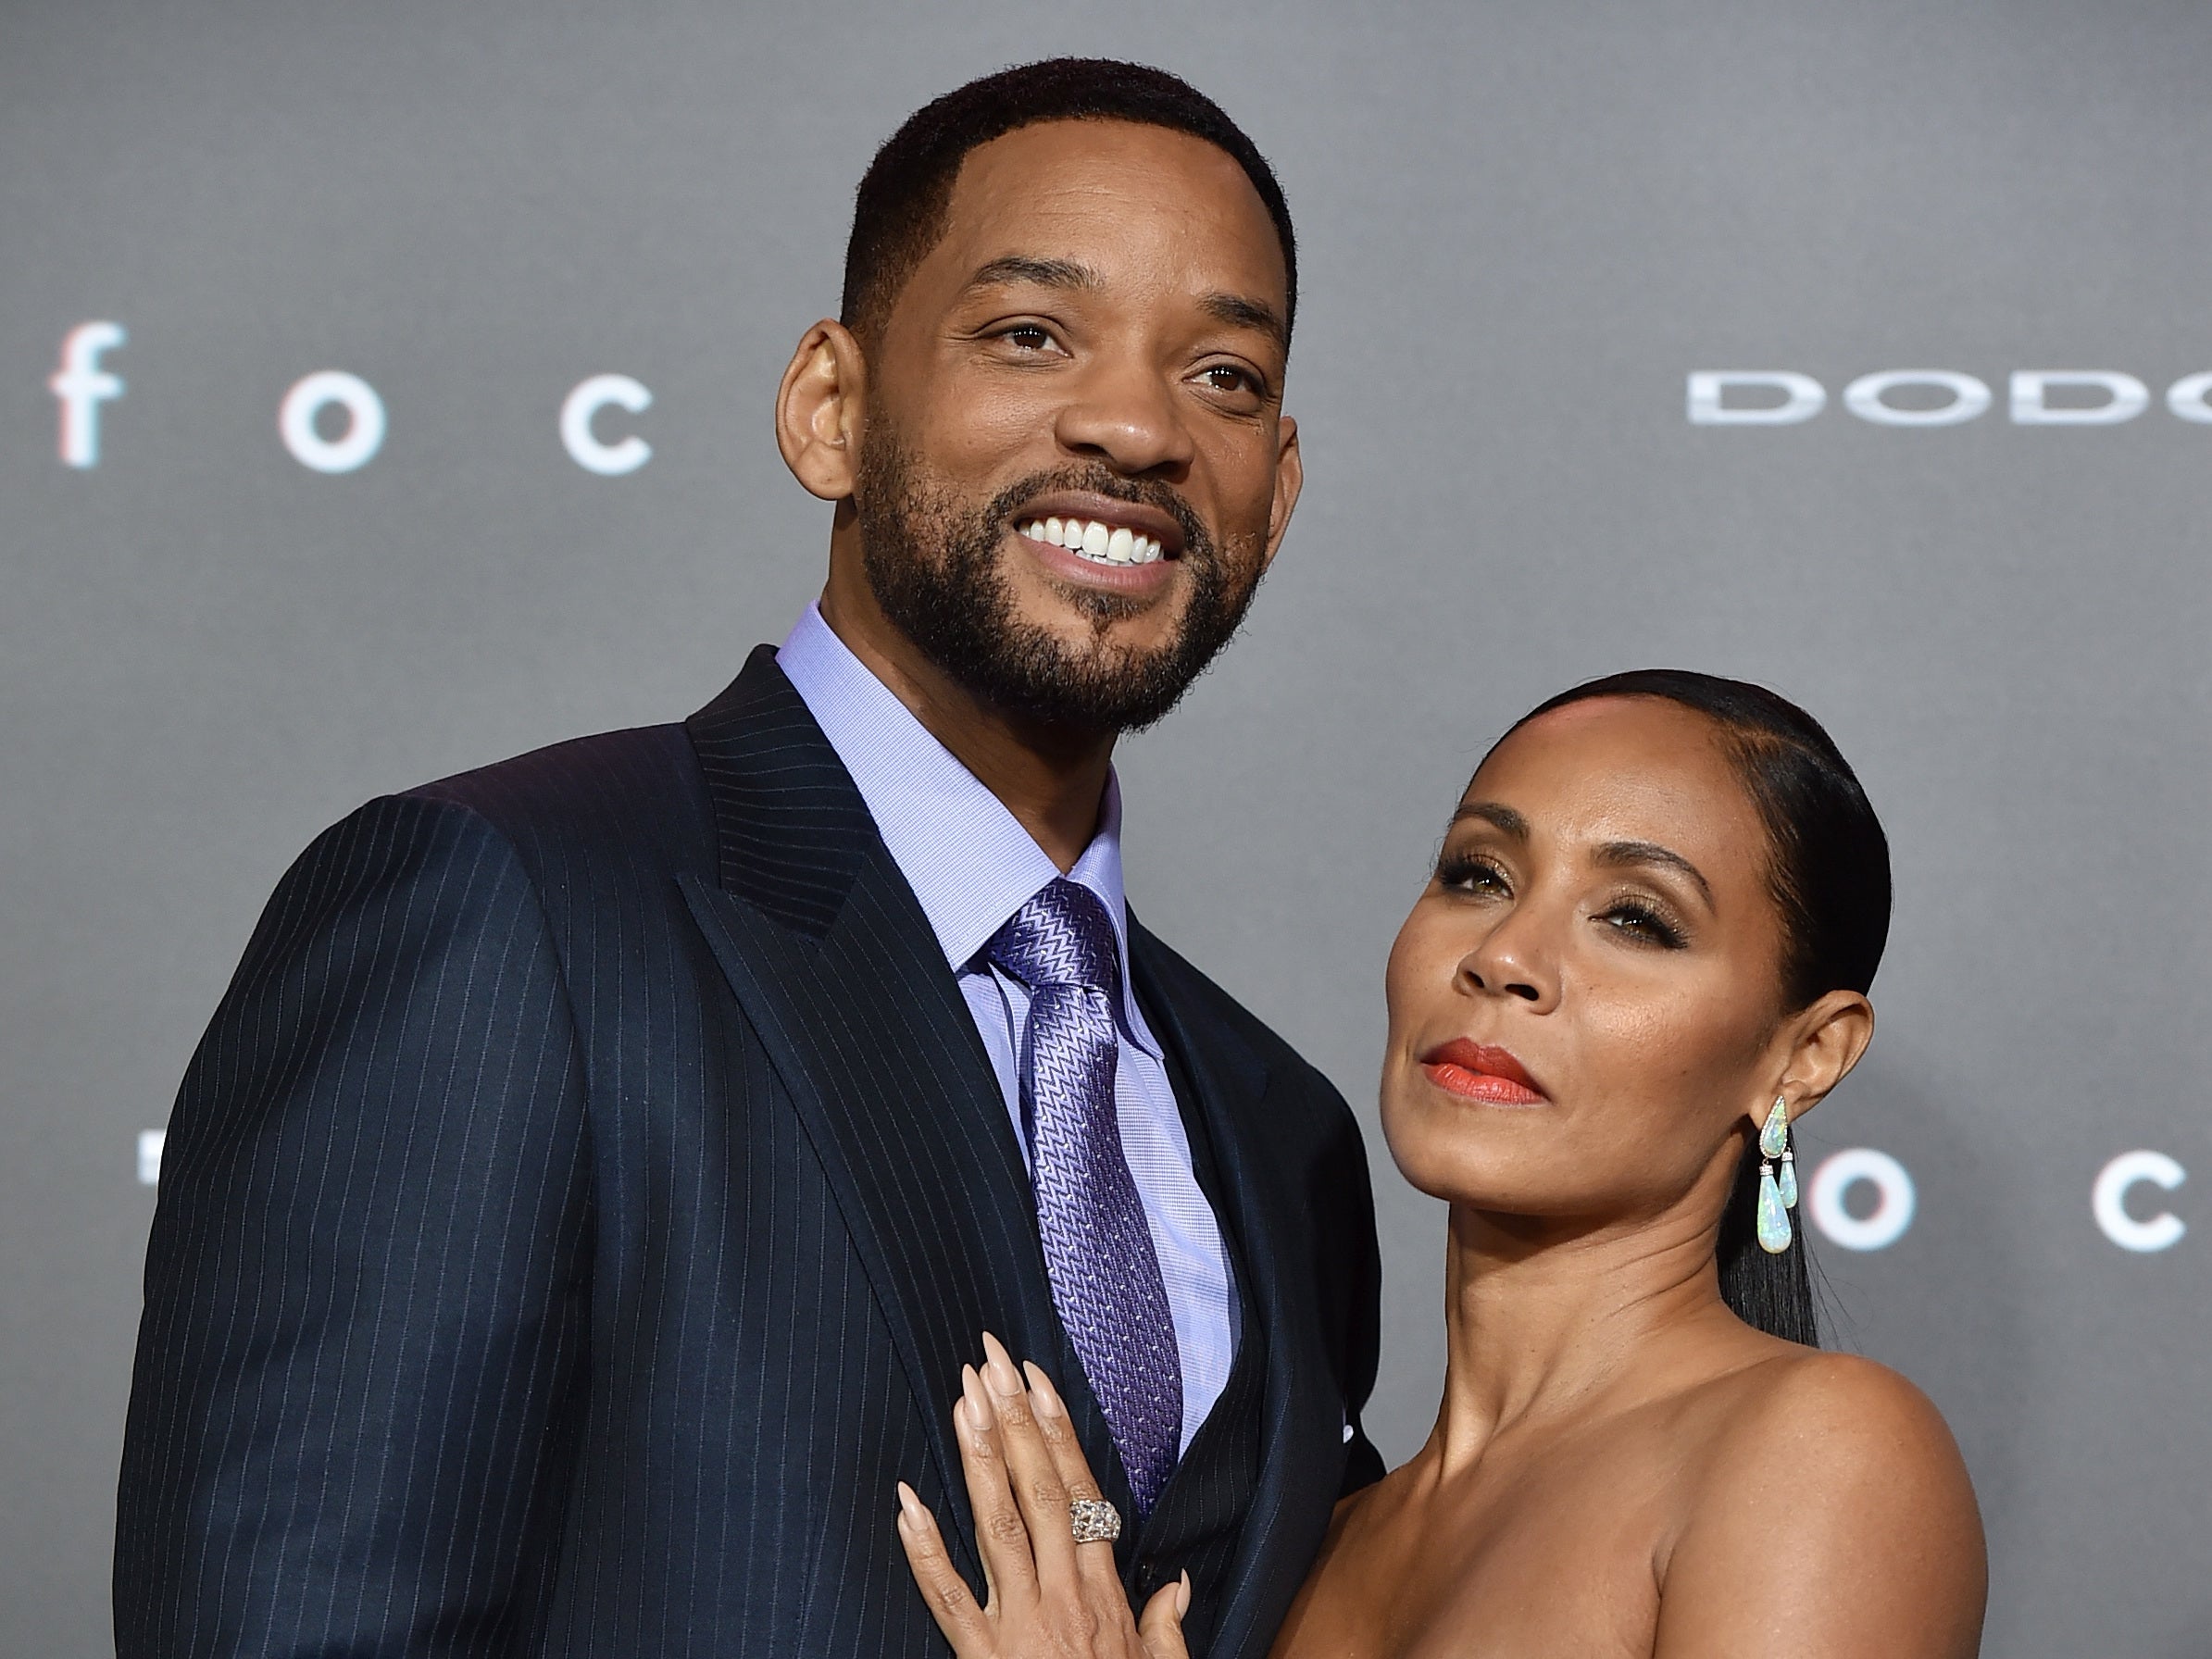 Will and Jada Pinkett Smith attend the premiere of Focus in 2015 (Getty Images)